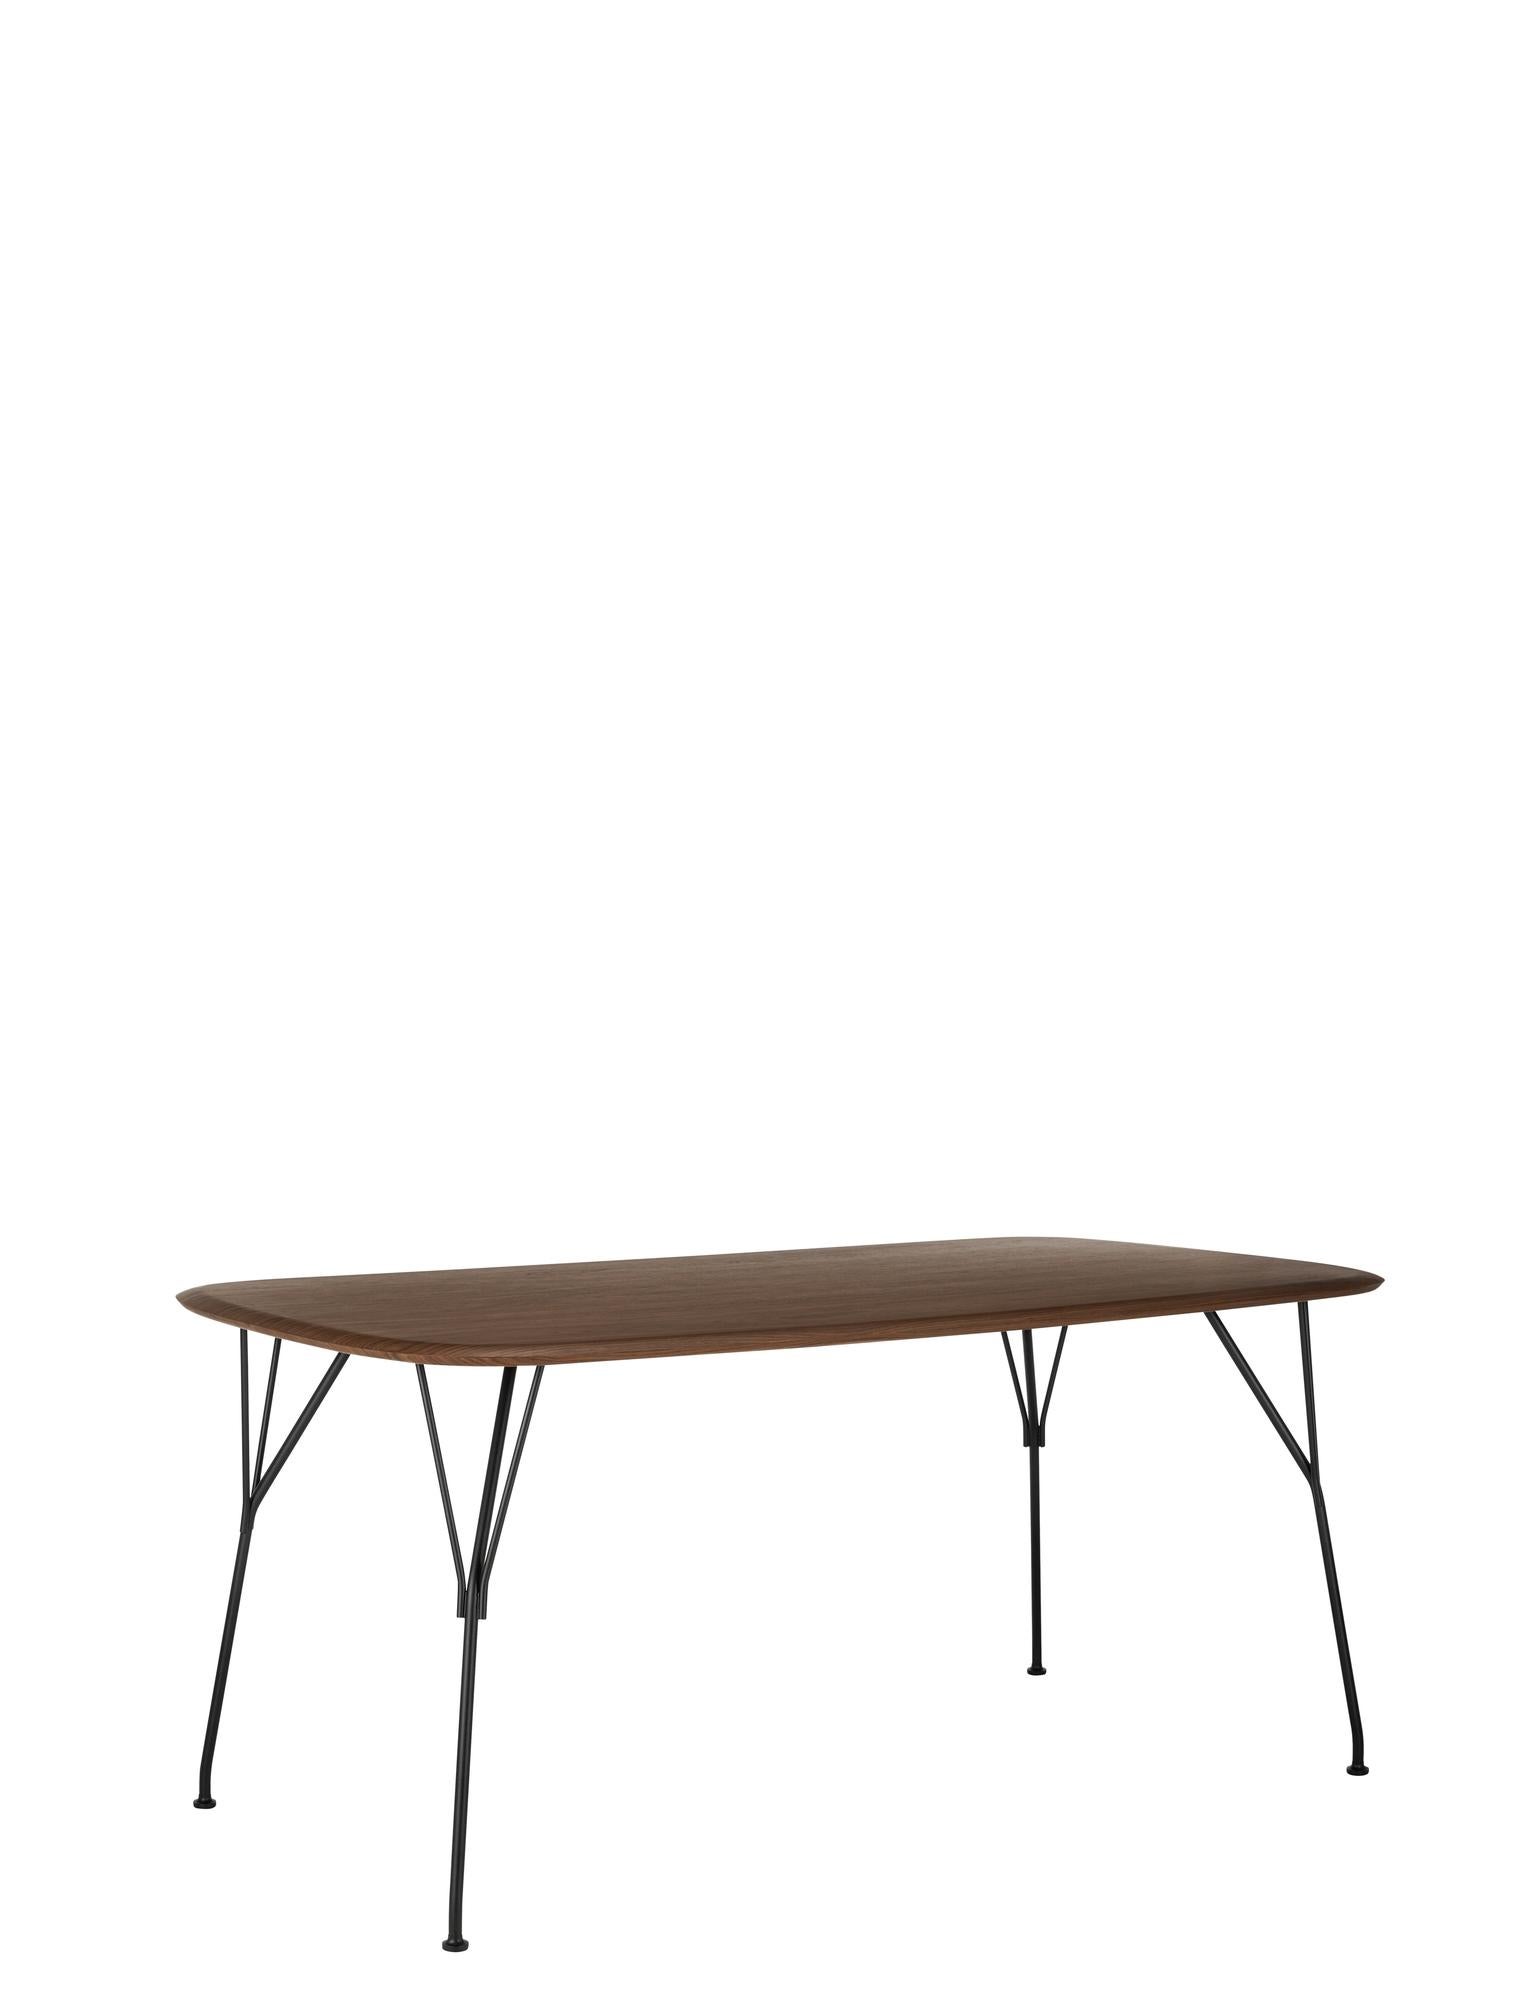 Viscount of wood tables are the latest addition. These naturally composed tables complement the collection's choice of seats and create a sustainable living area in which wood plays a central role thanks to its lightweight properties. These large